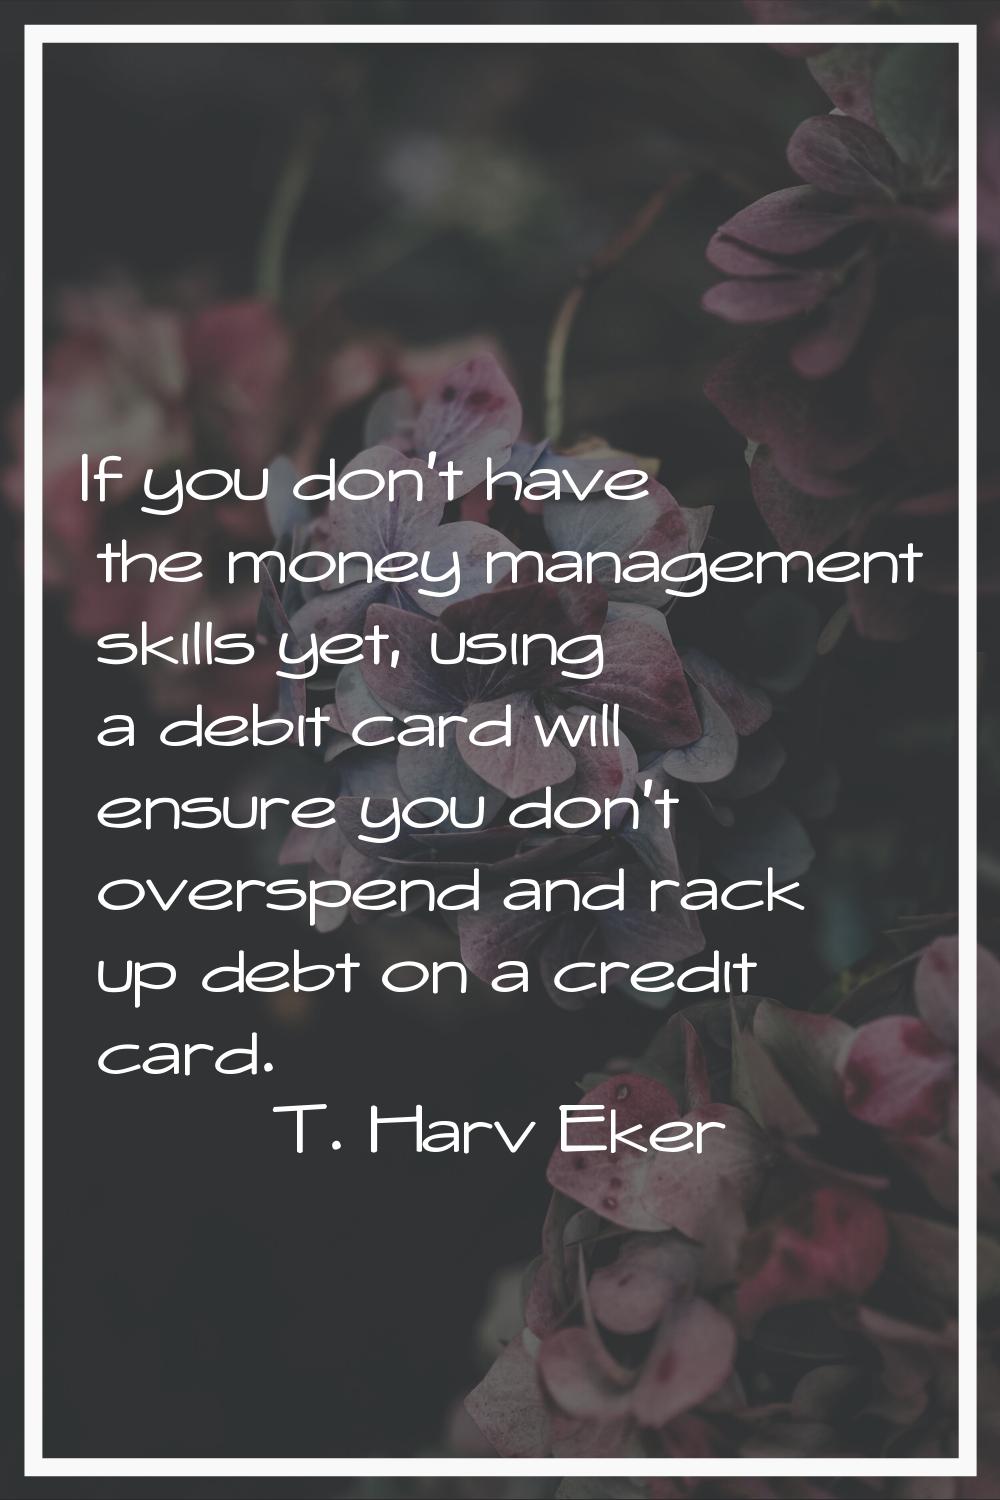 If you don't have the money management skills yet, using a debit card will ensure you don't overspe